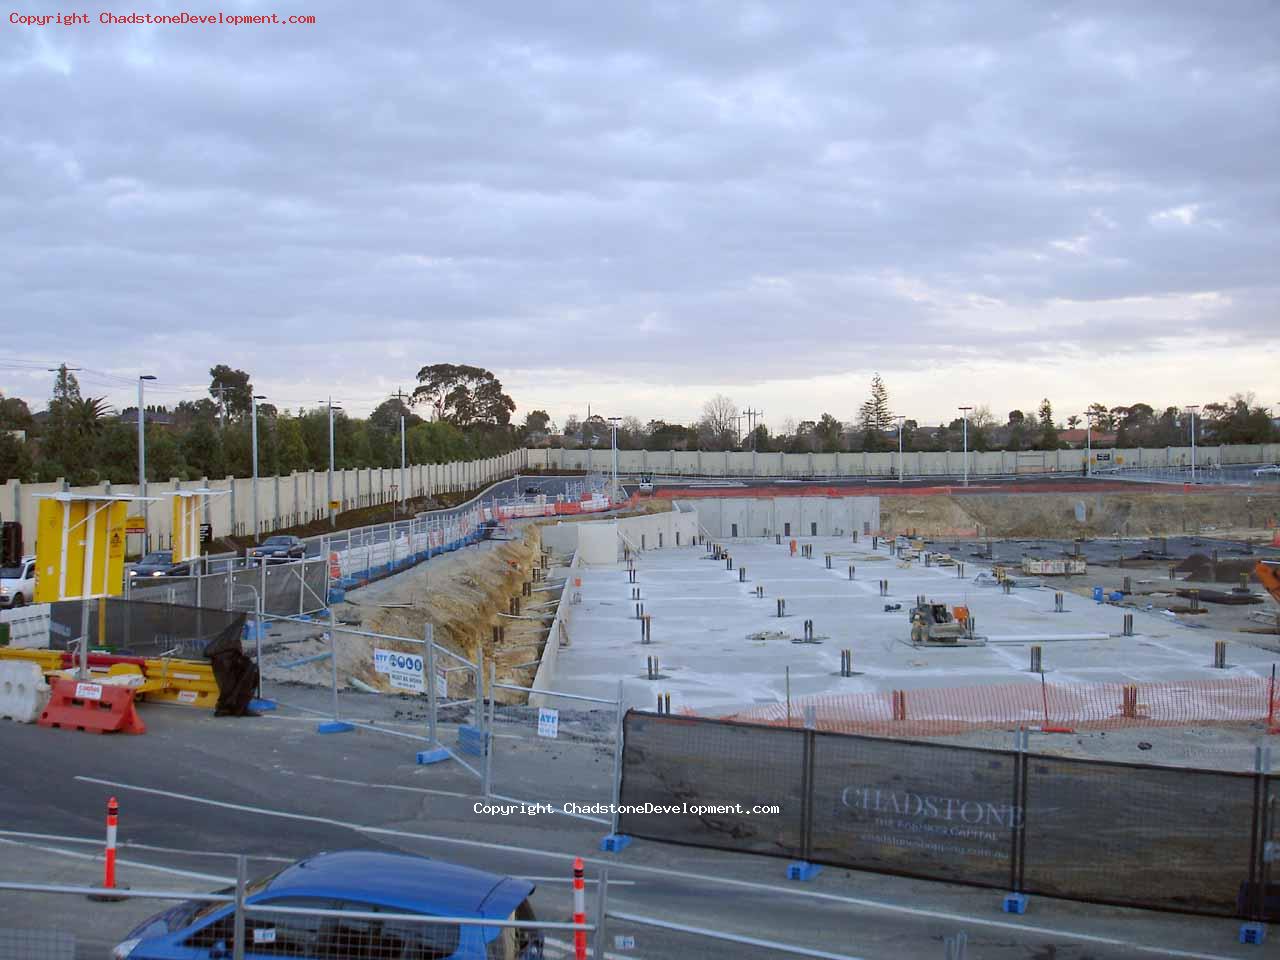 Eastern side of new carpark floor fully laid - Chadstone Development Discussions Gallery